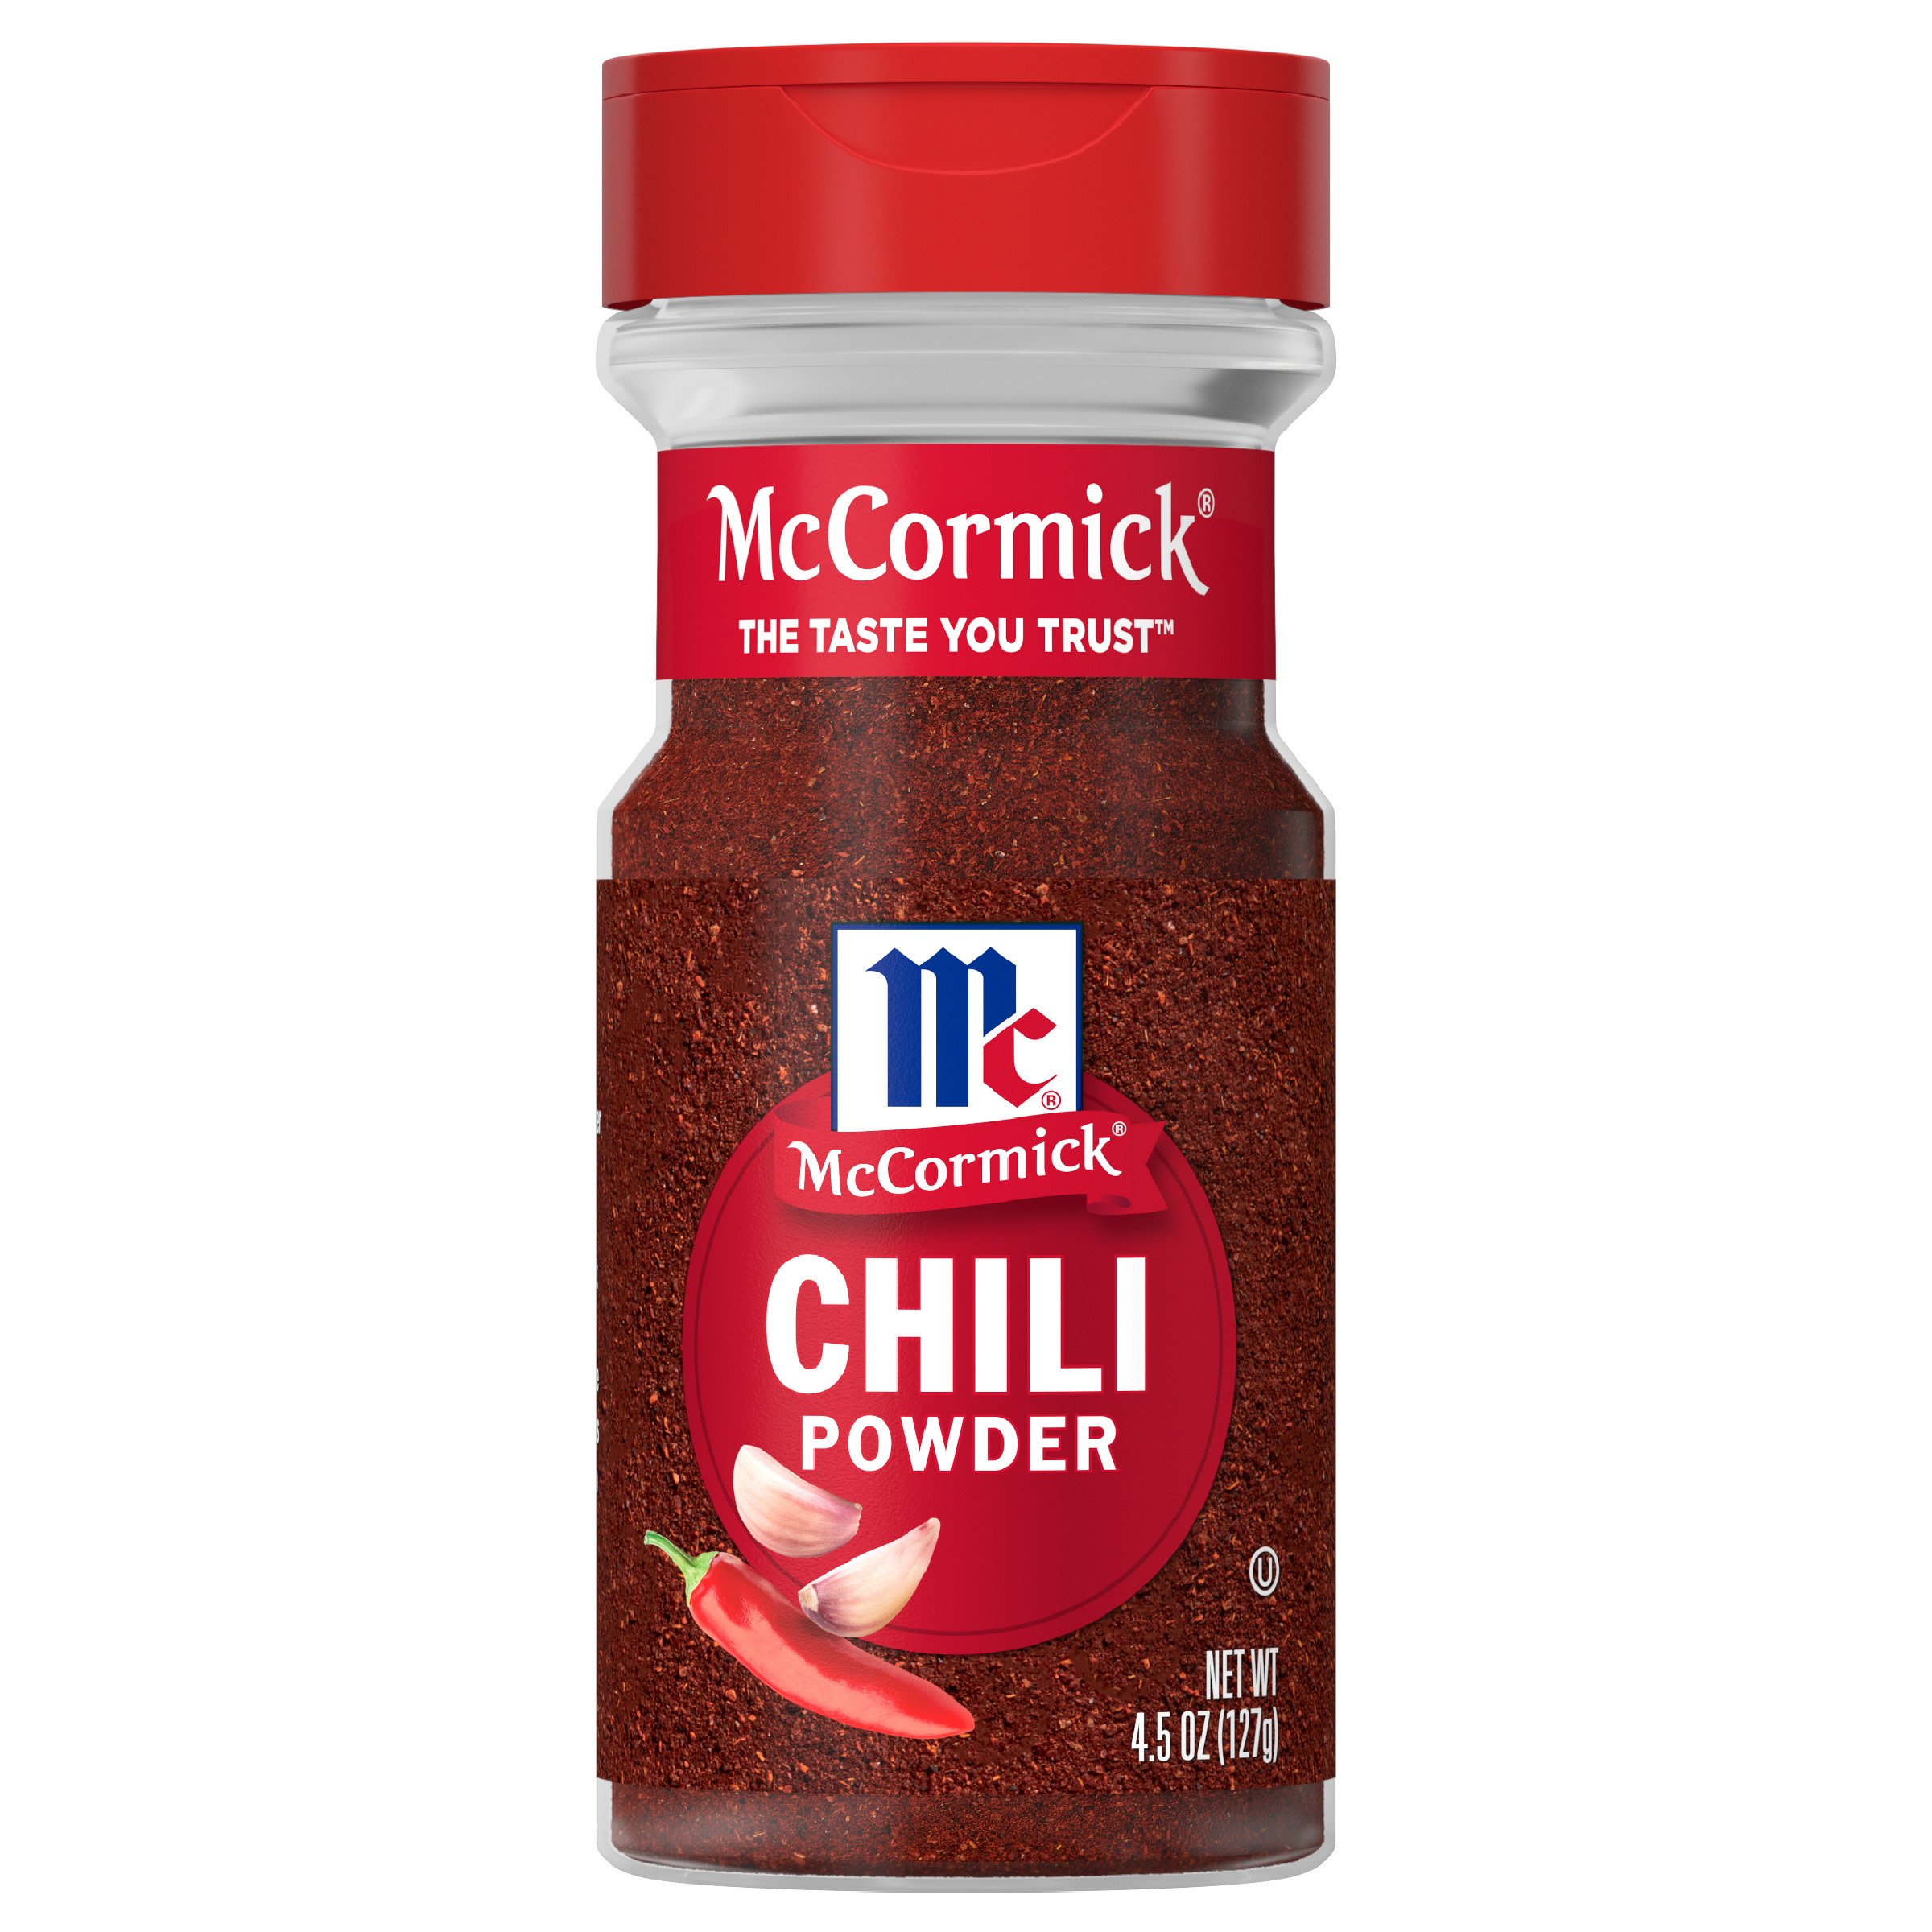 use with mexico chili powder